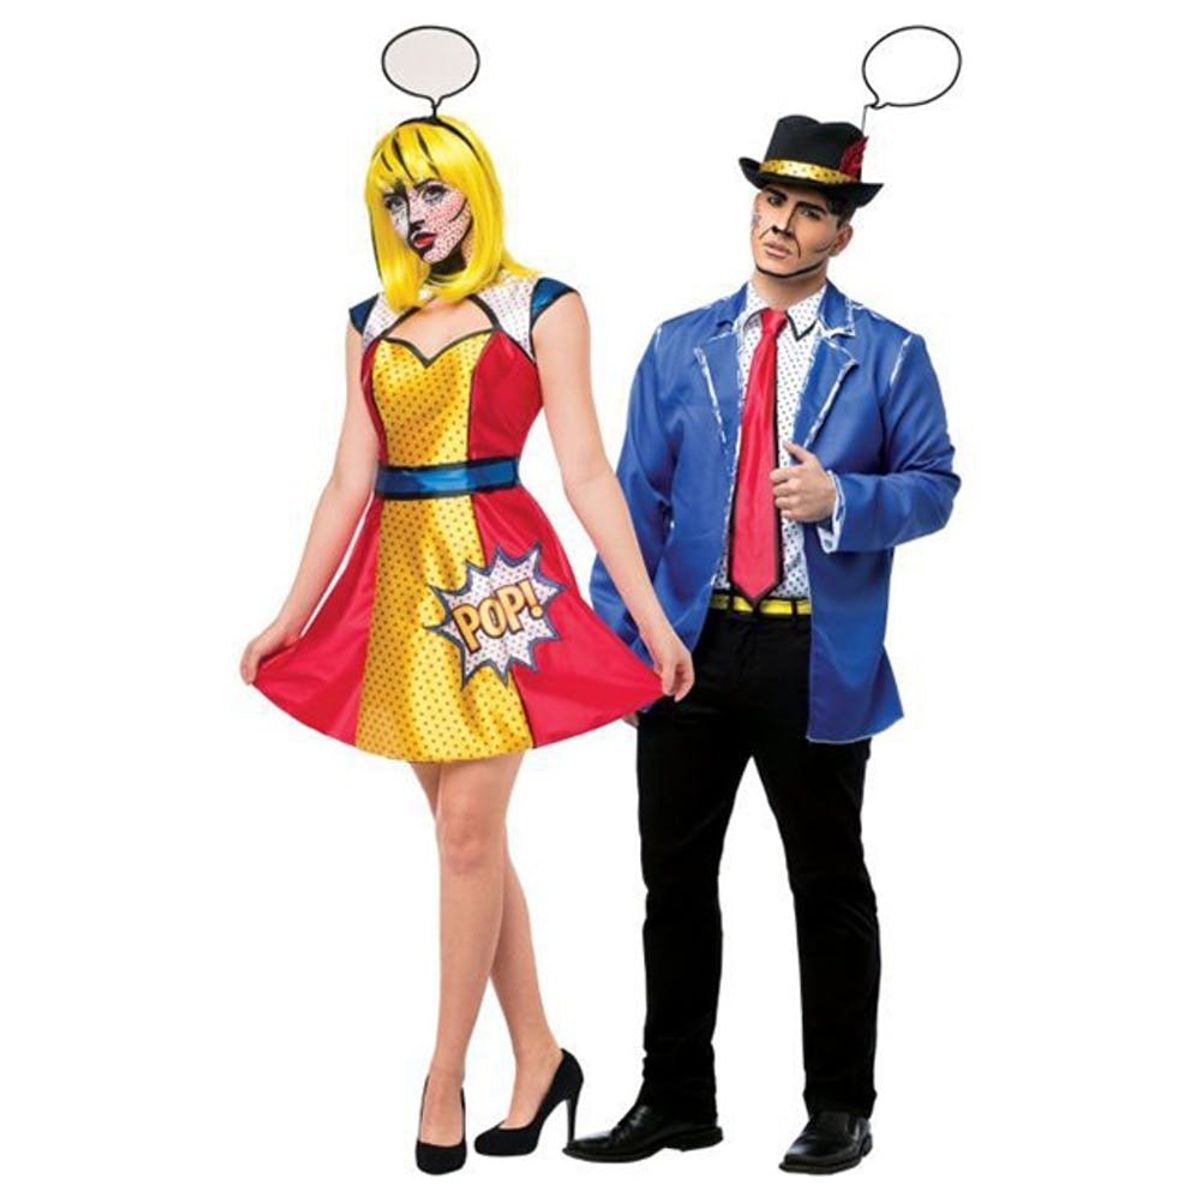 31 Party City Costumes Worth Considering for Halloween